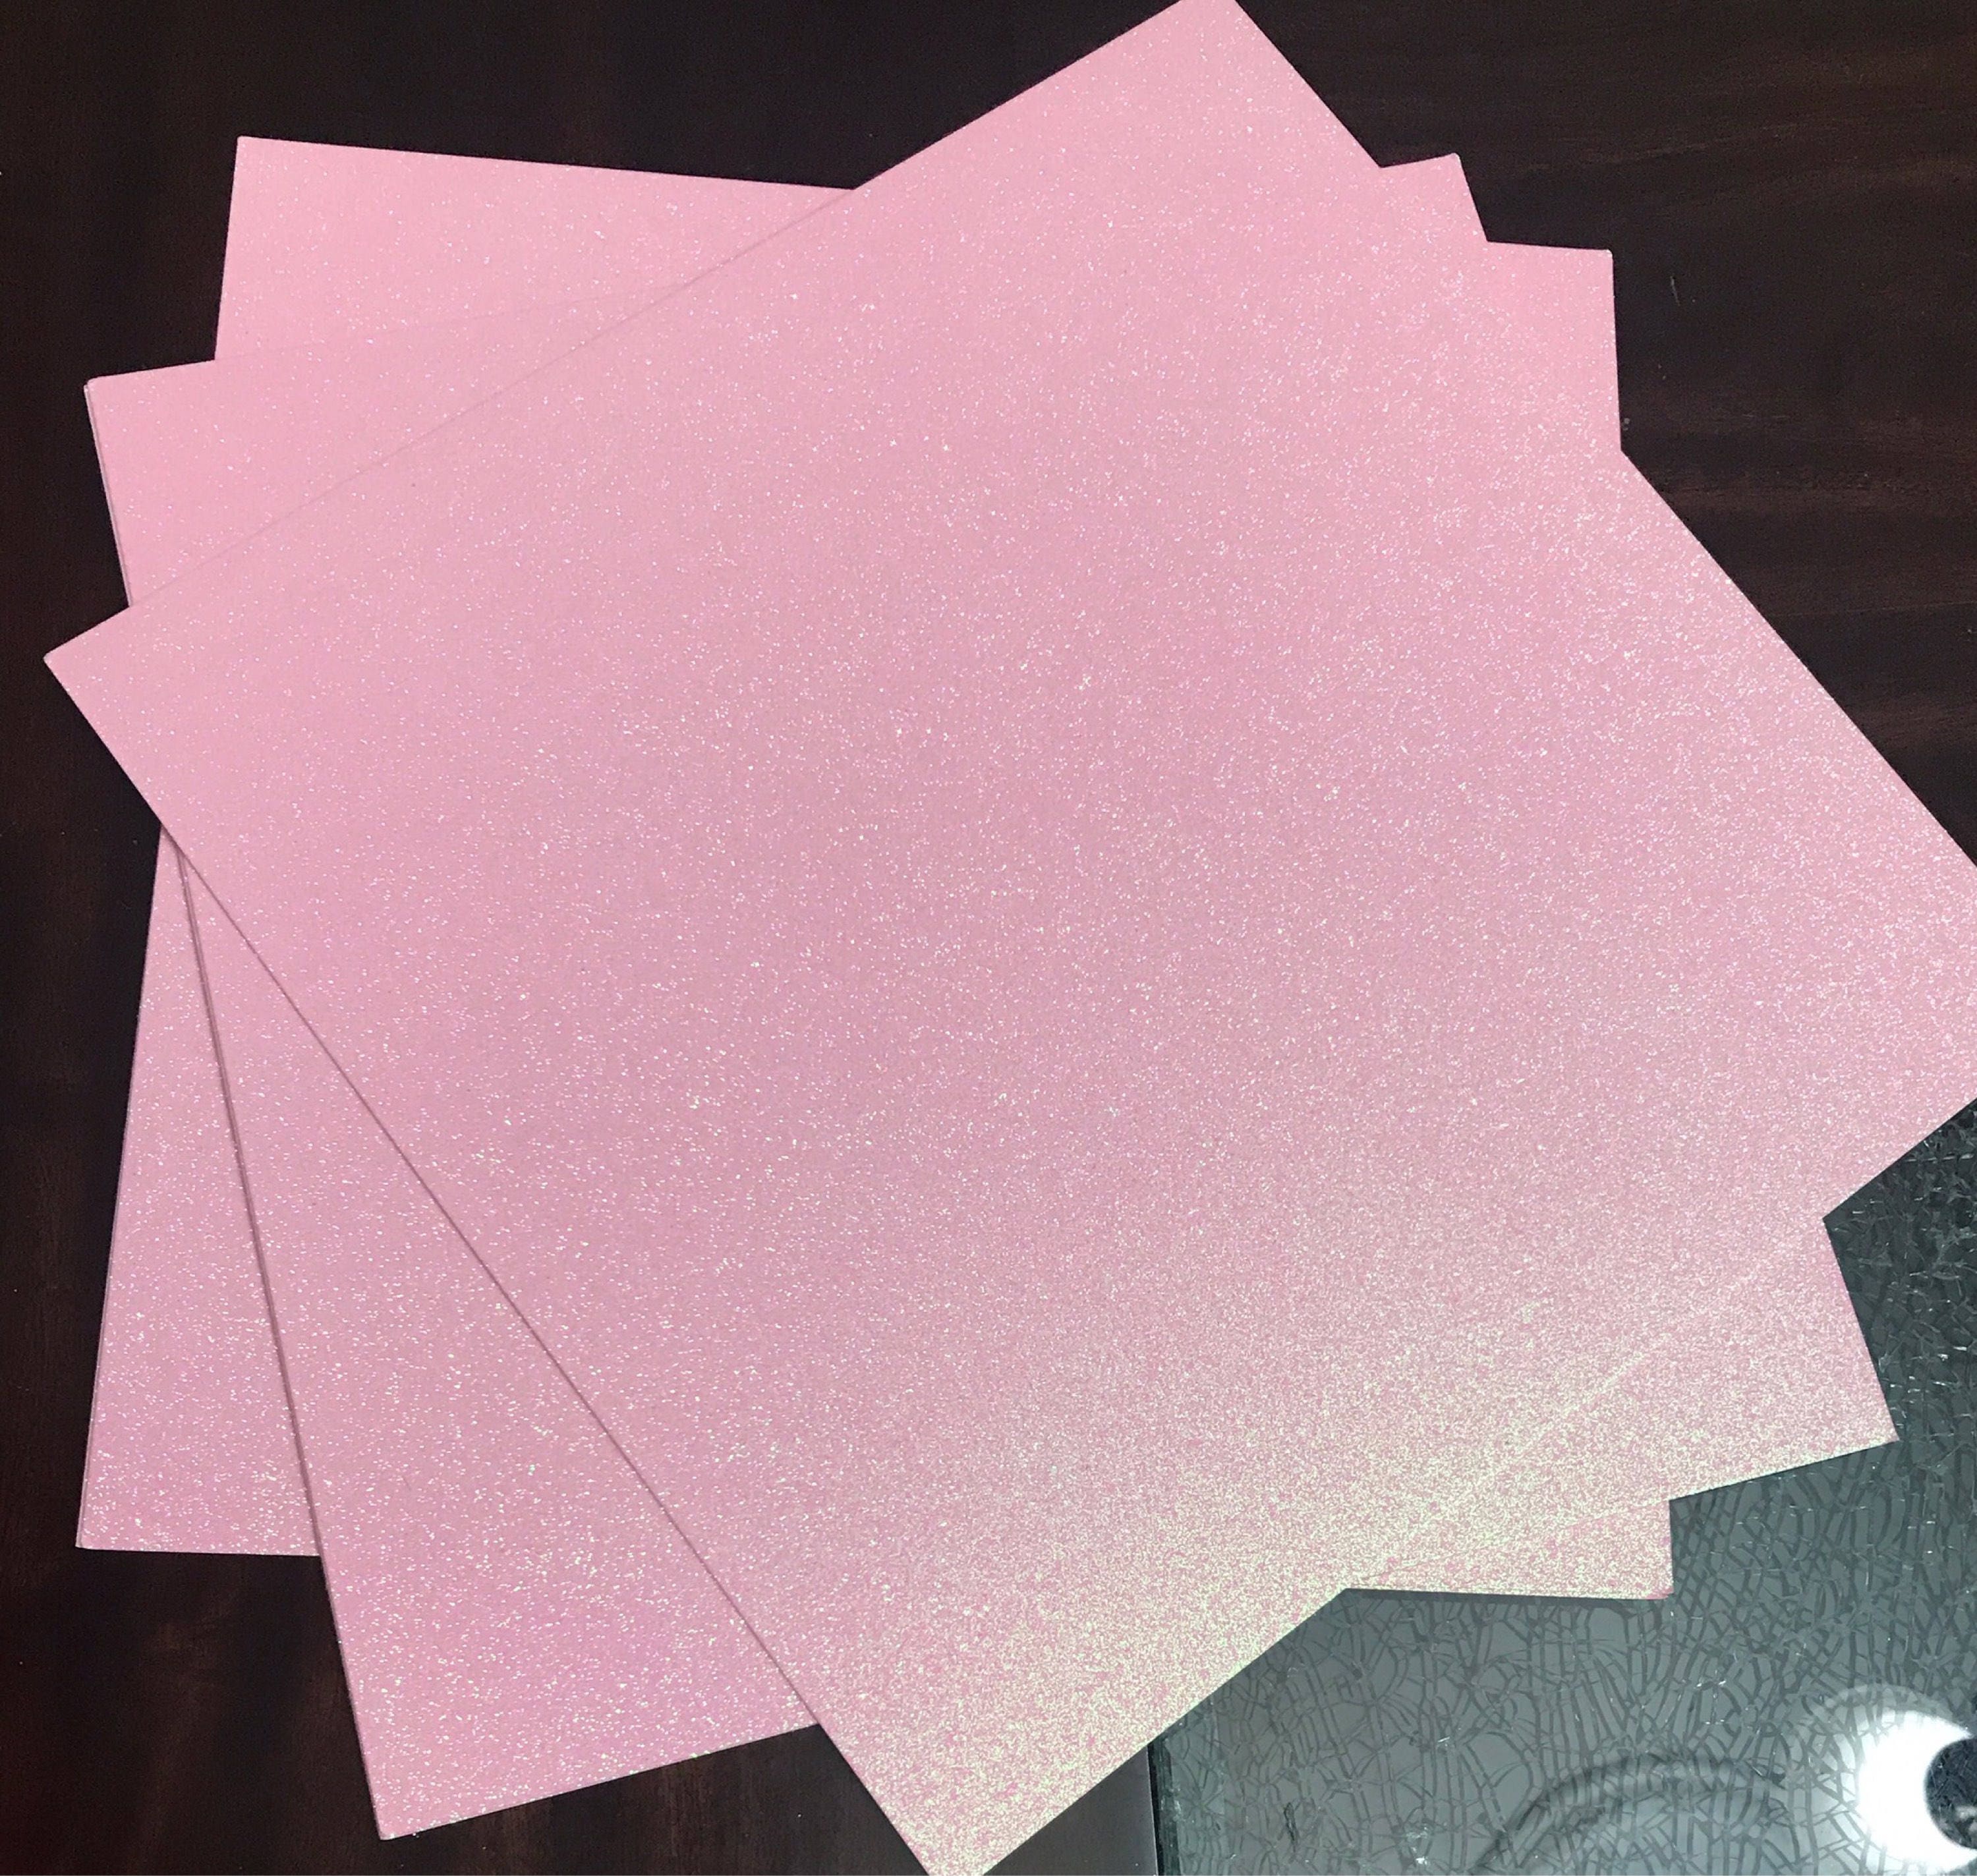 Red, Pink, and Blush Cardstock - 20+ Hues on Premium Paper